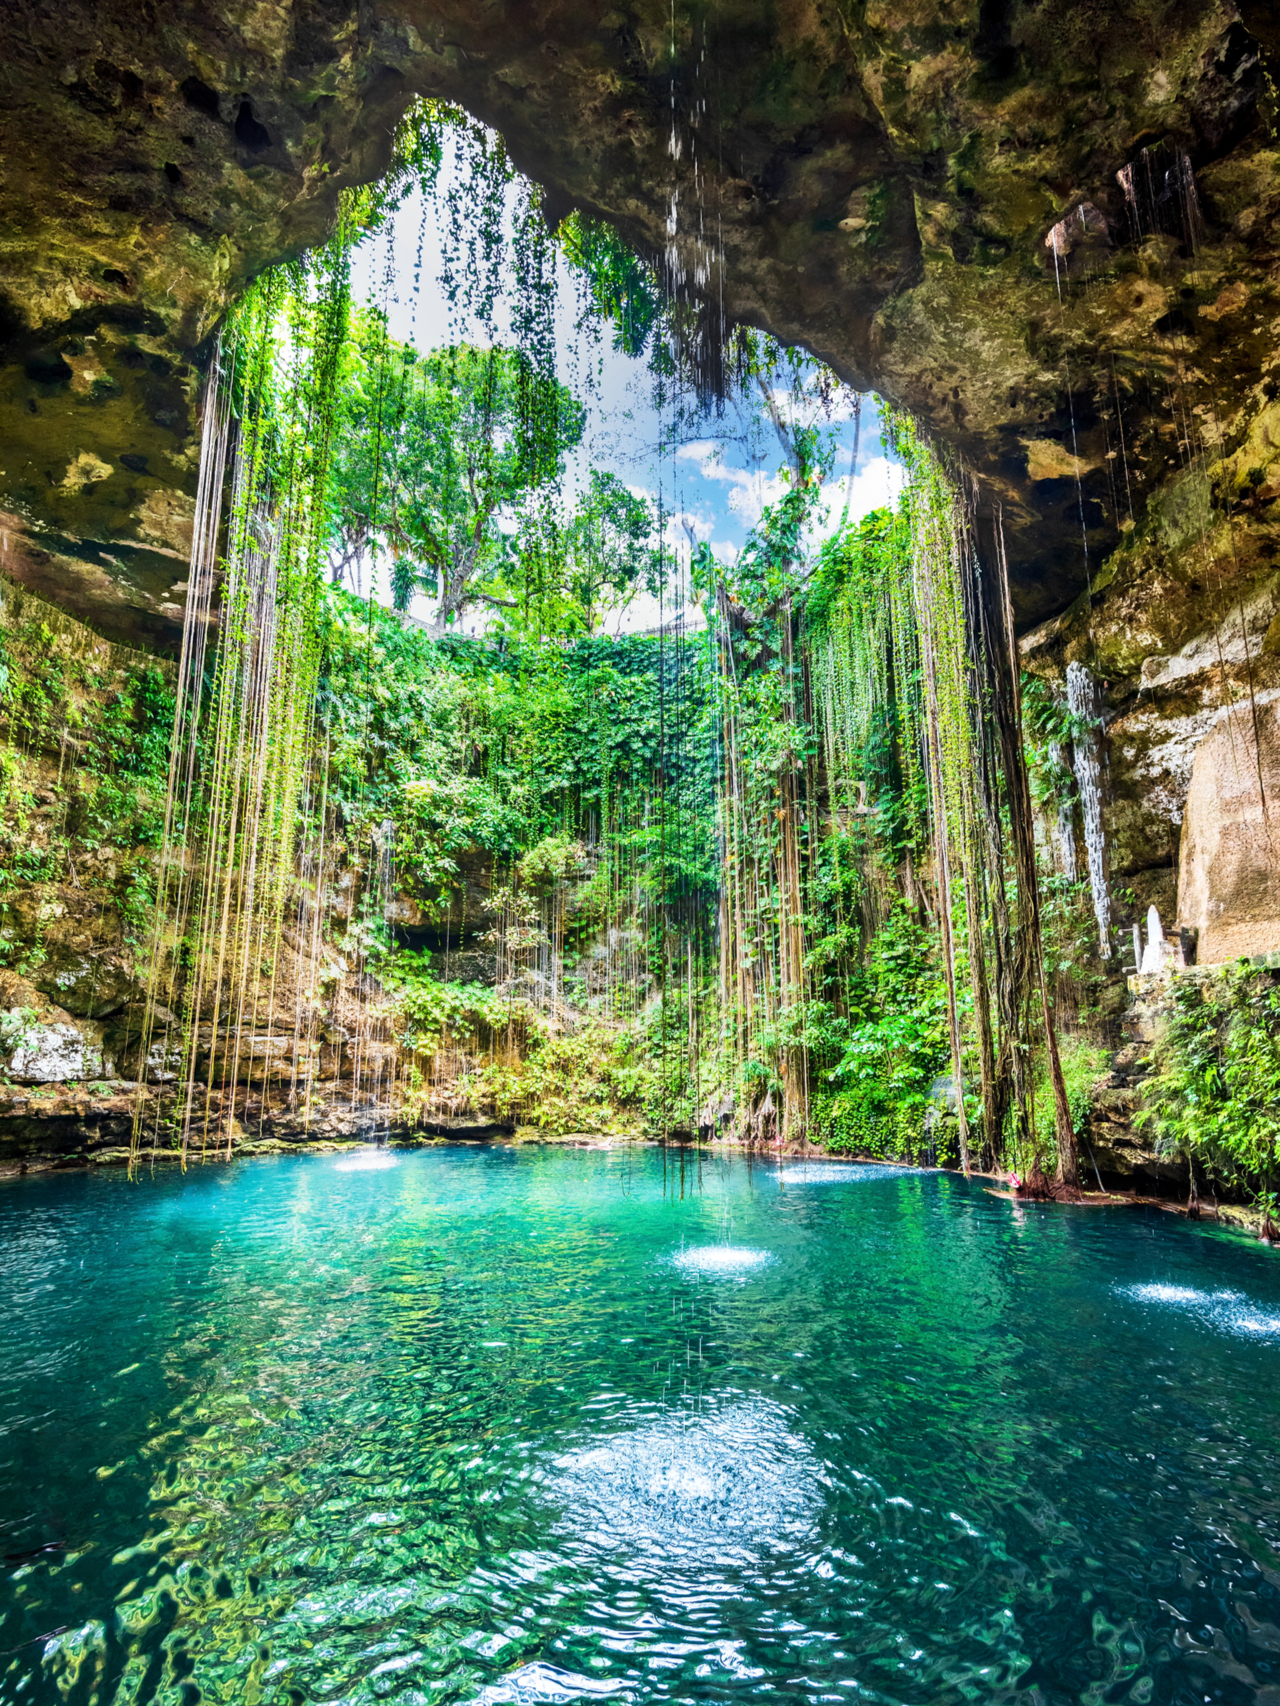 Gorgeous cenote, one of the best places to visit in Mexico